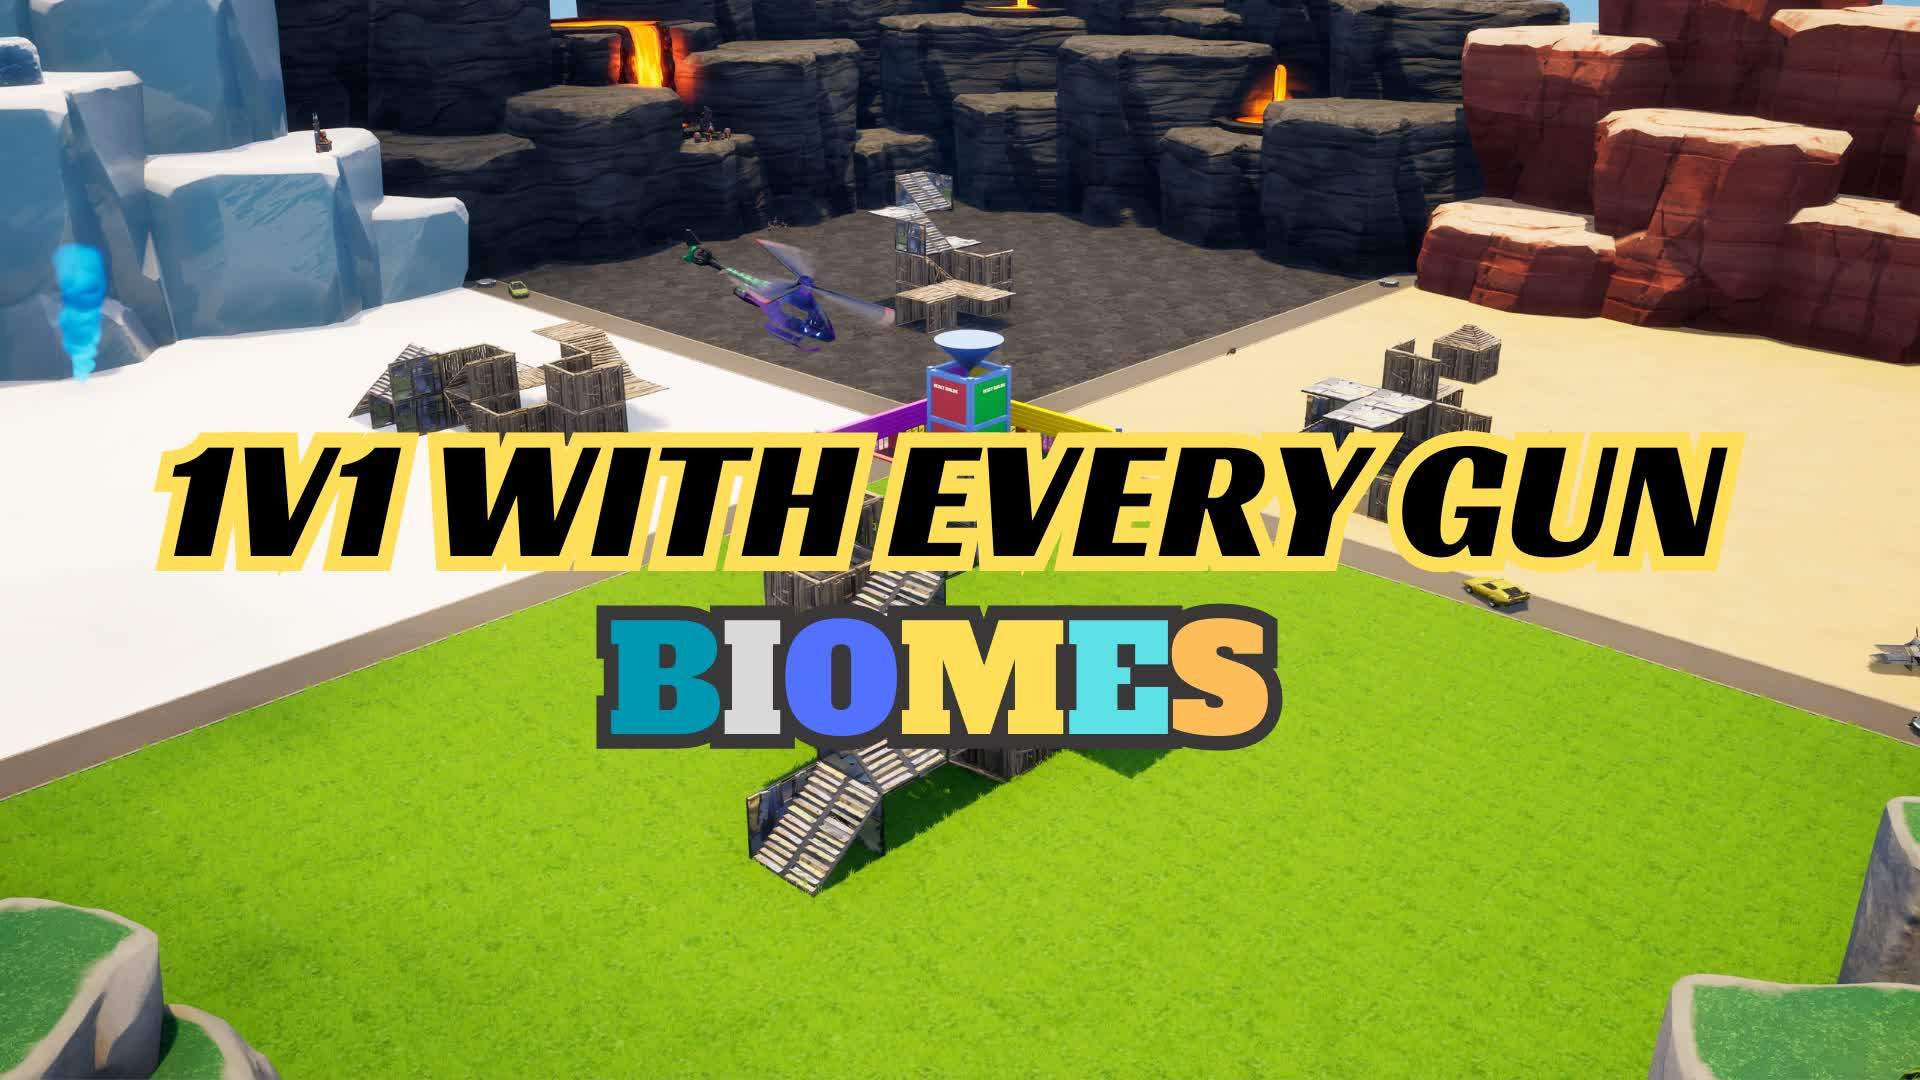 1v1 With Every Gun 🔫 Biomes!